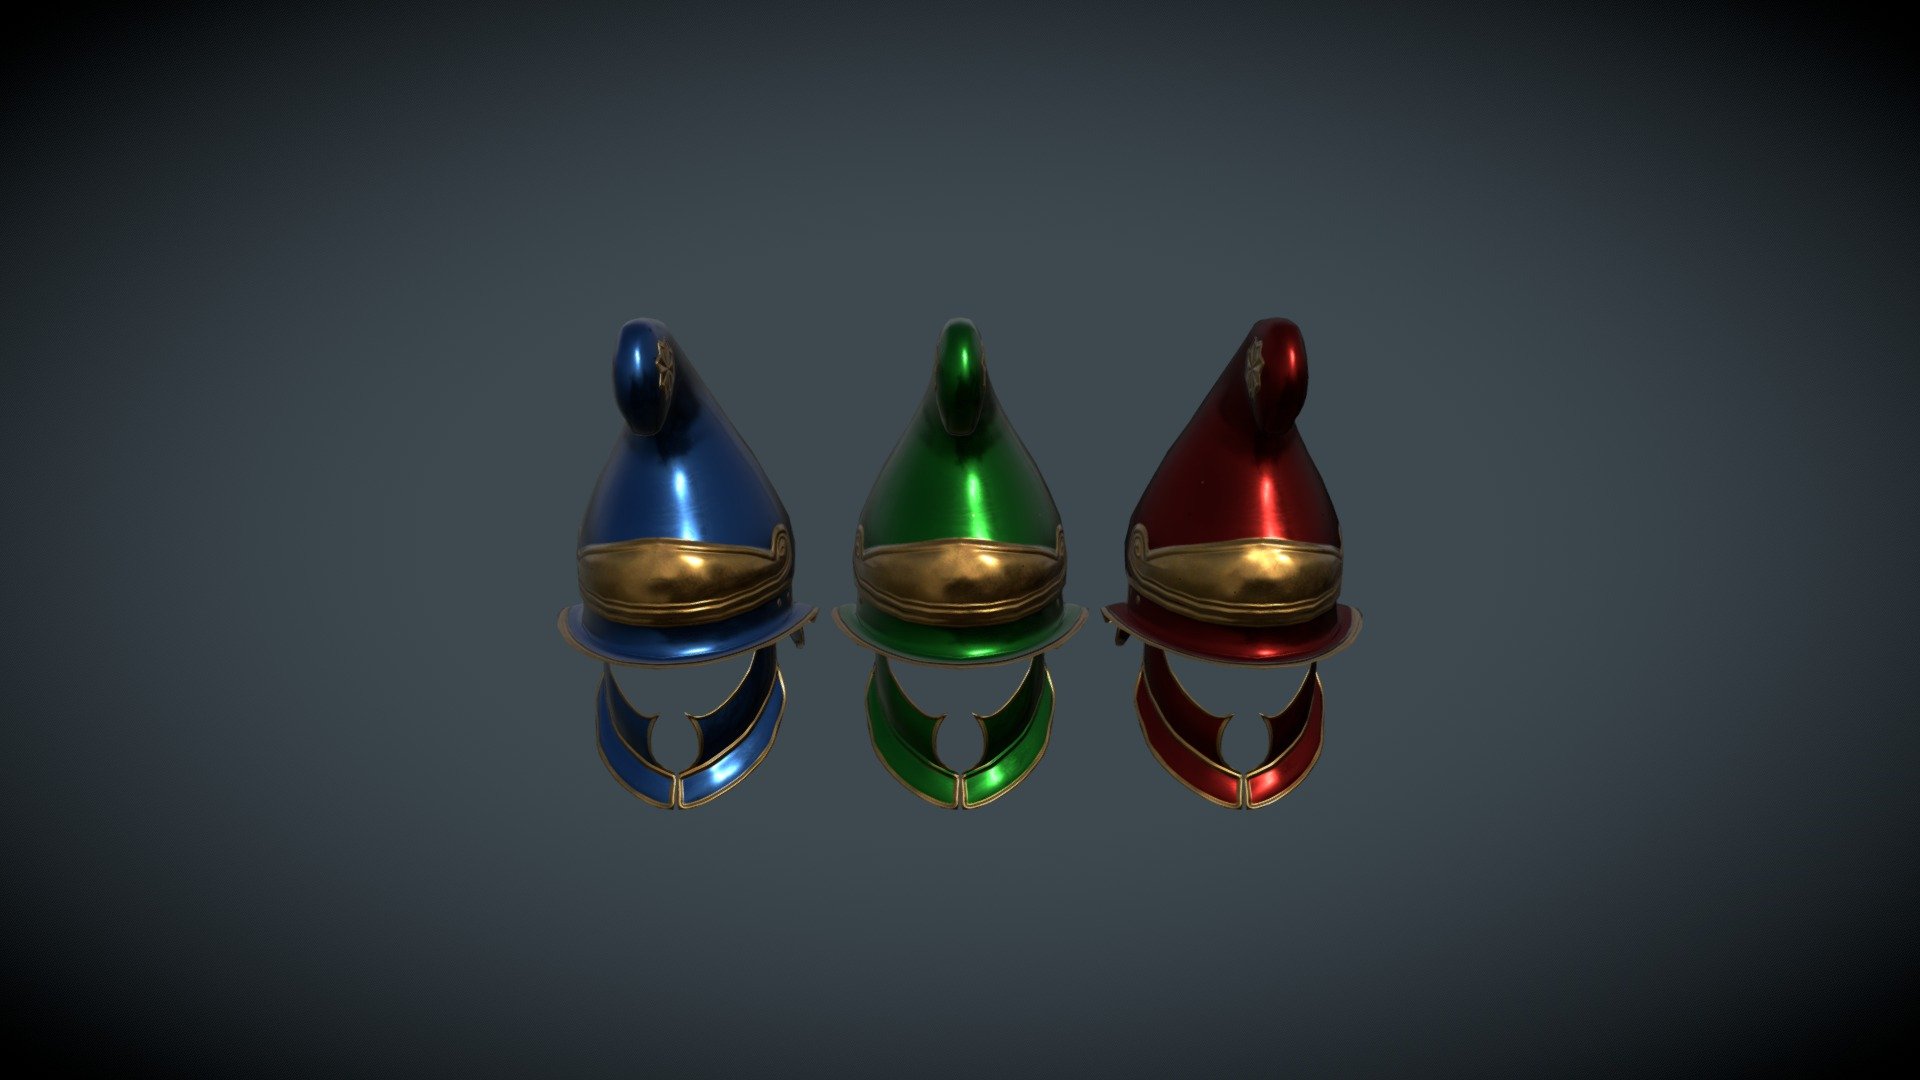 Helmet variations of the Phyrgian family with faceguard

Made for the RIR: Imperium Surrectum mod, for the game Rome Total War Remastered.

Made in Blender 664 Verts / 612 Faces

The process consists of modelling a low poly version, from which a copy is made with a very high dense mesh where details are sculpted in, later baked onto its low poly counterpart.

The different colours are textured painted in 3d model